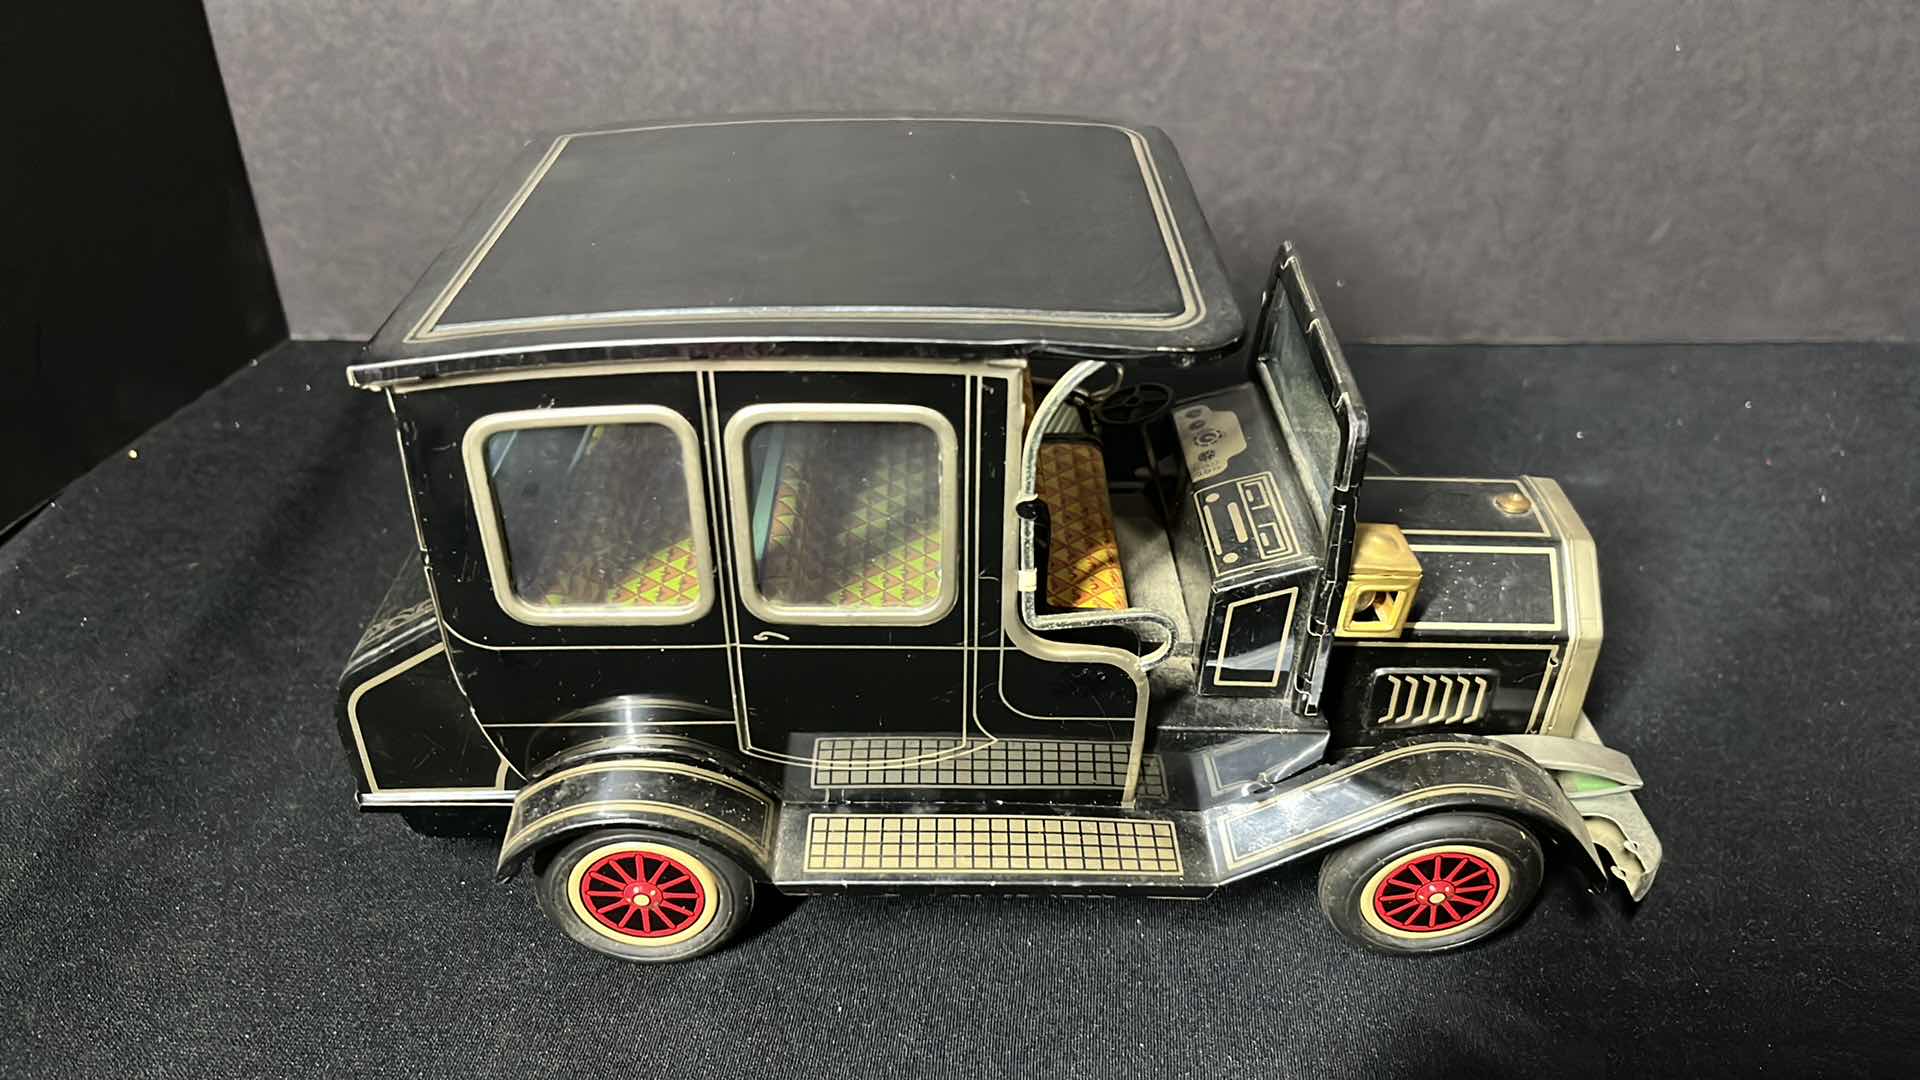 Photo 4 of S.H. HORIKAWA OLD TIMER CAR BATTERY OPERATED ACTION TOY